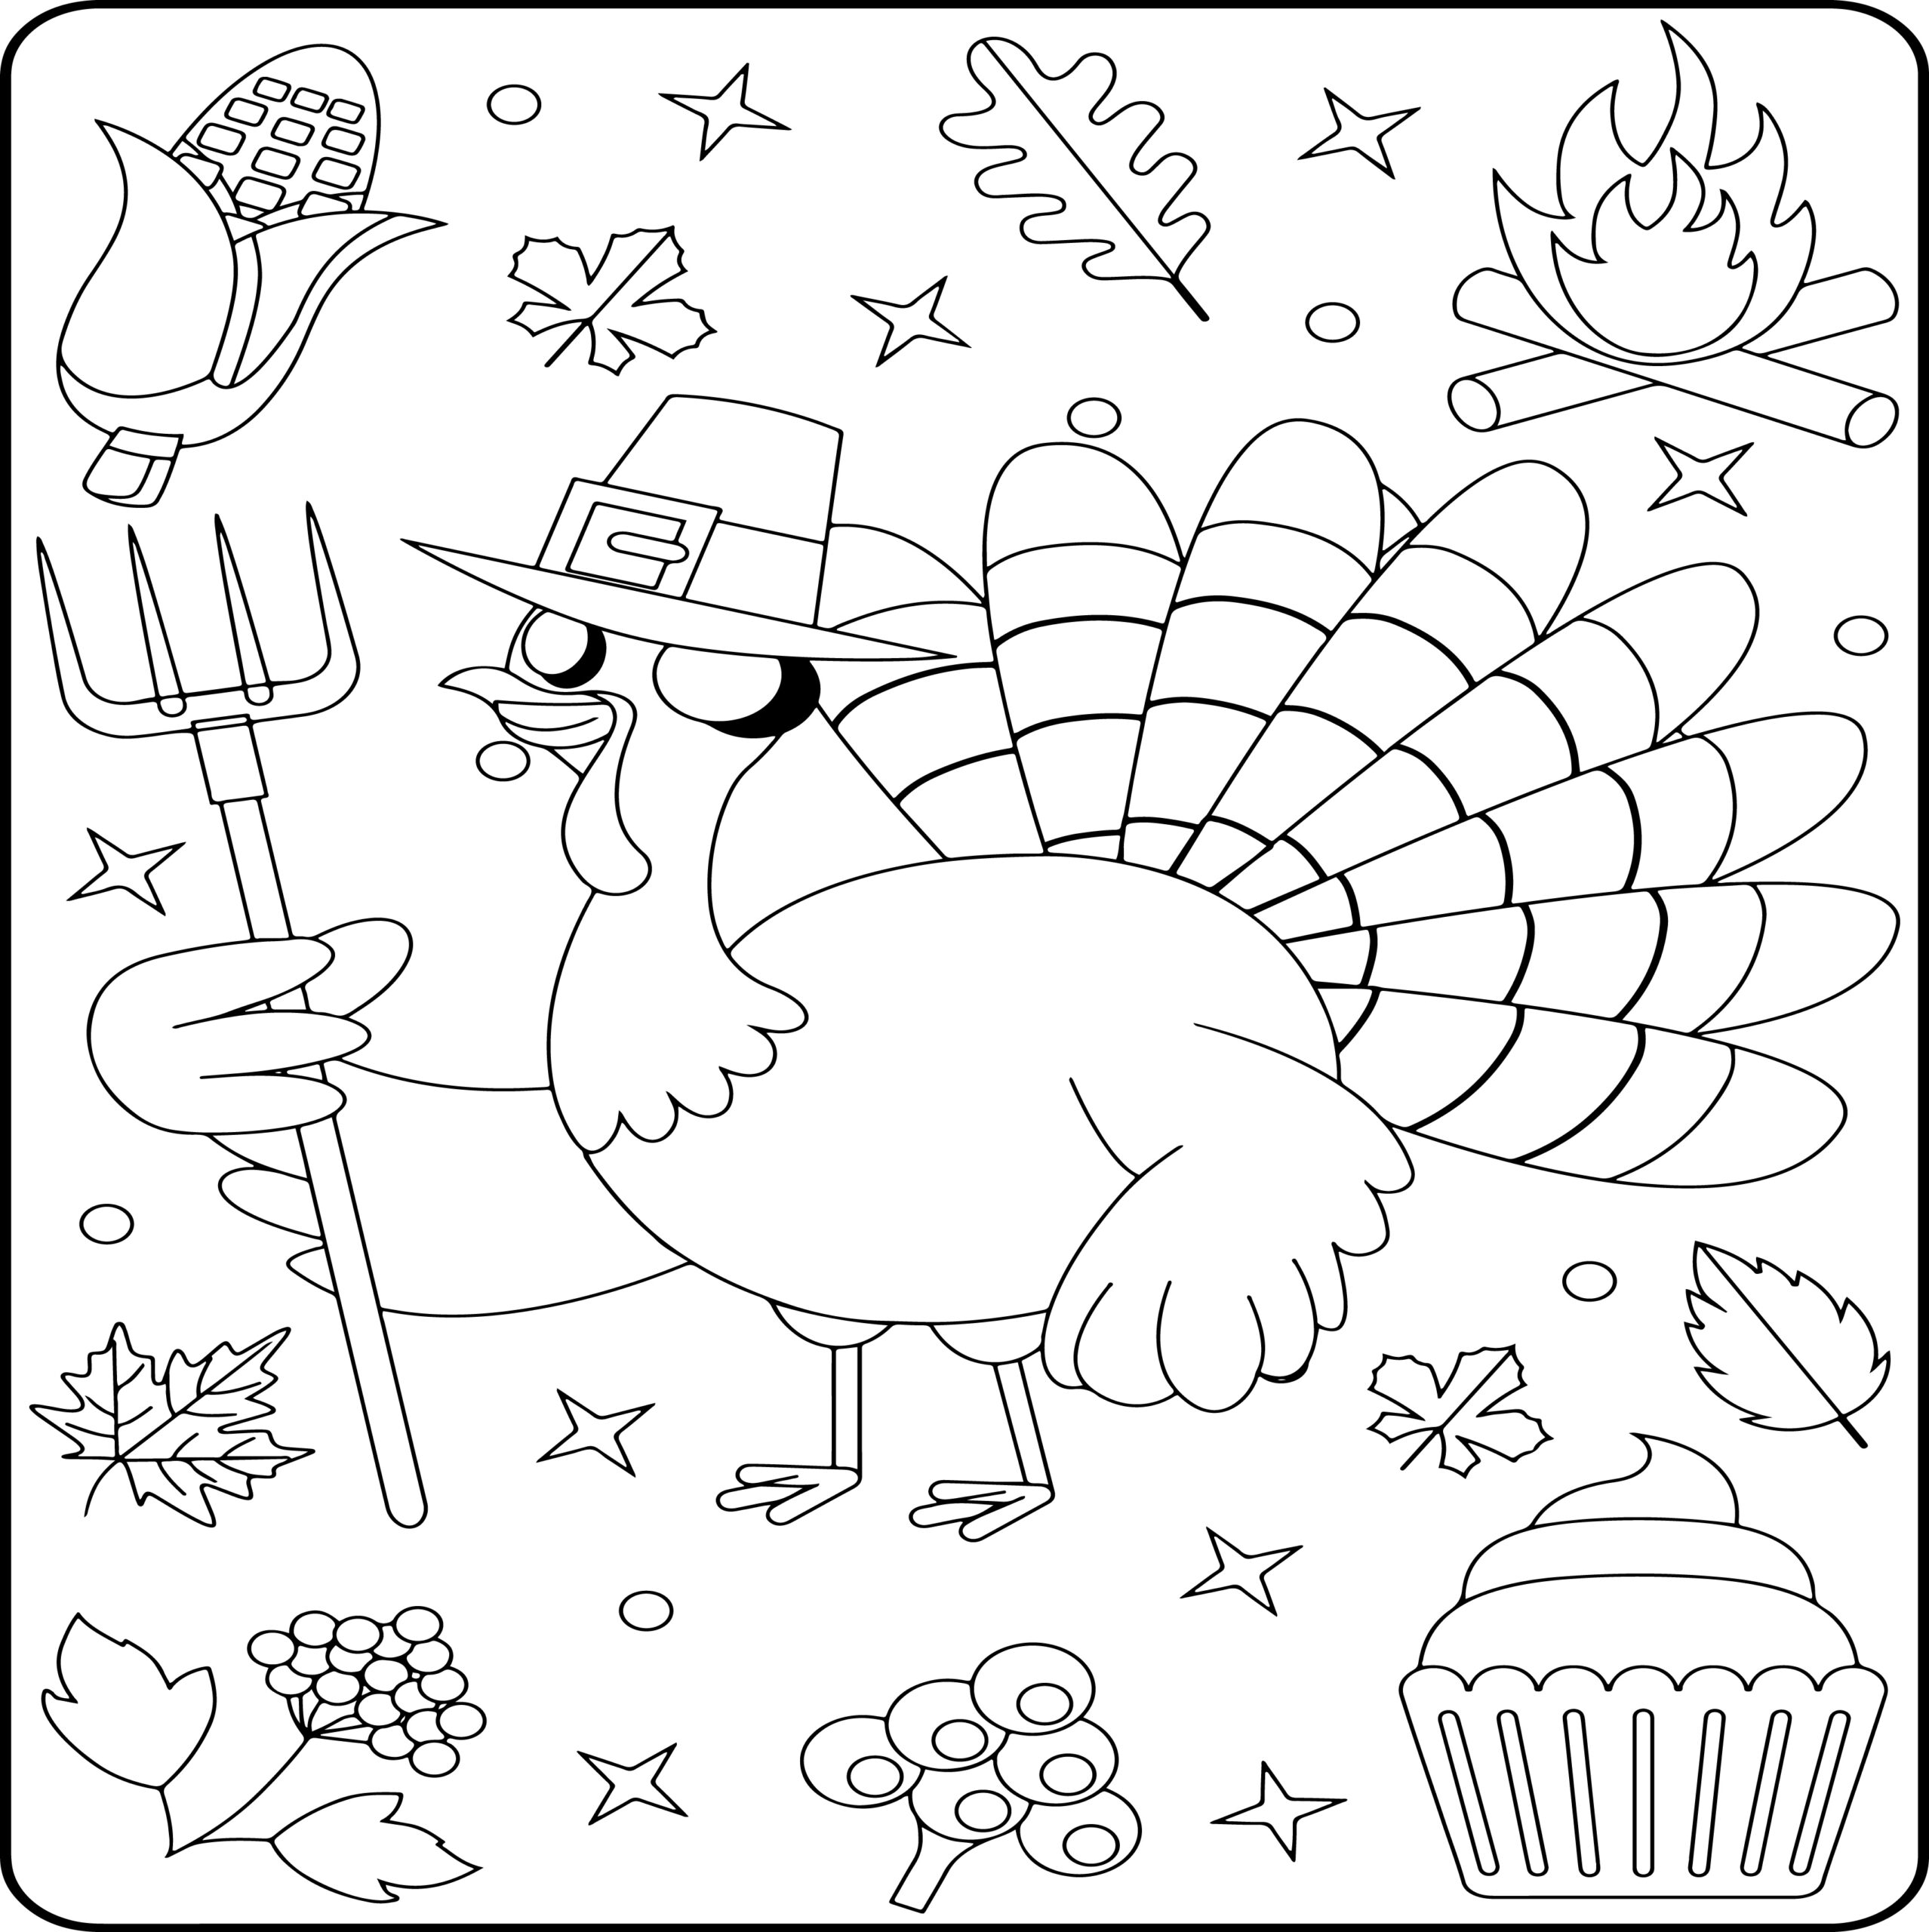 Thanksgiving coloring book for kids cute fun thanksgiving coloring pages made by teachers